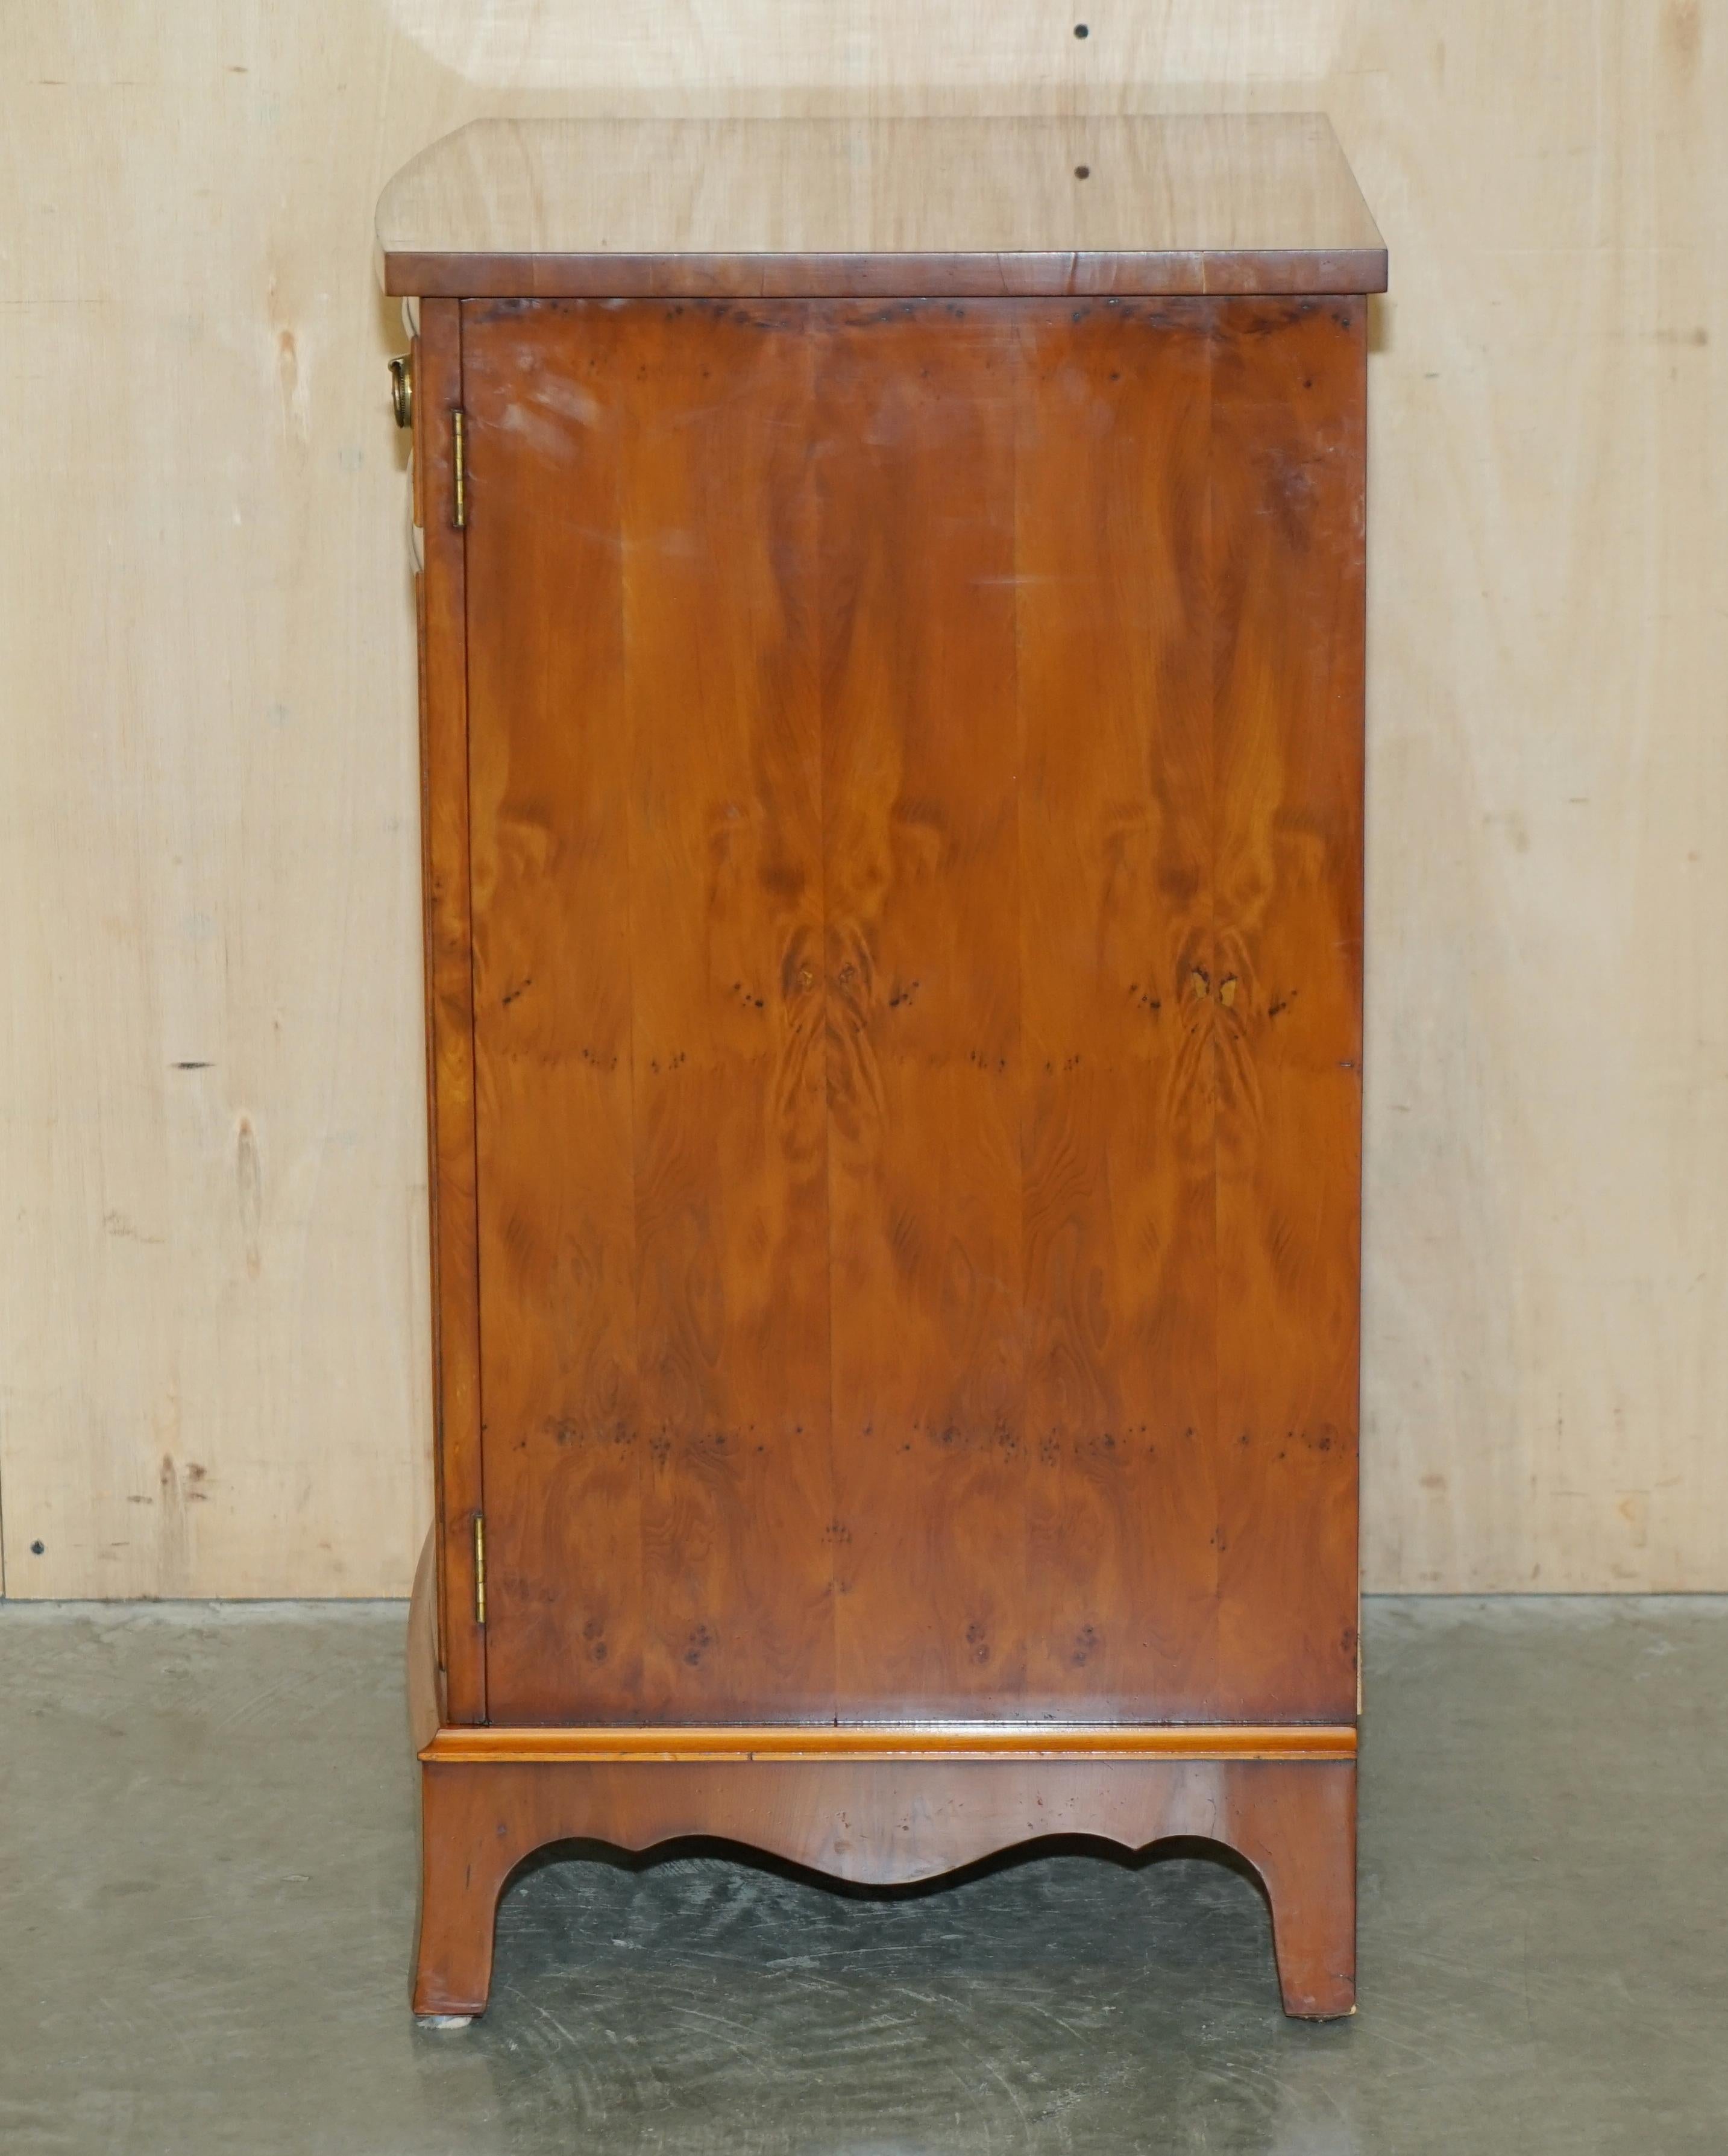 Burr & Burl Walnut Vintage Record Player Cabinet with Lift Up Top & Shelves For Sale 7